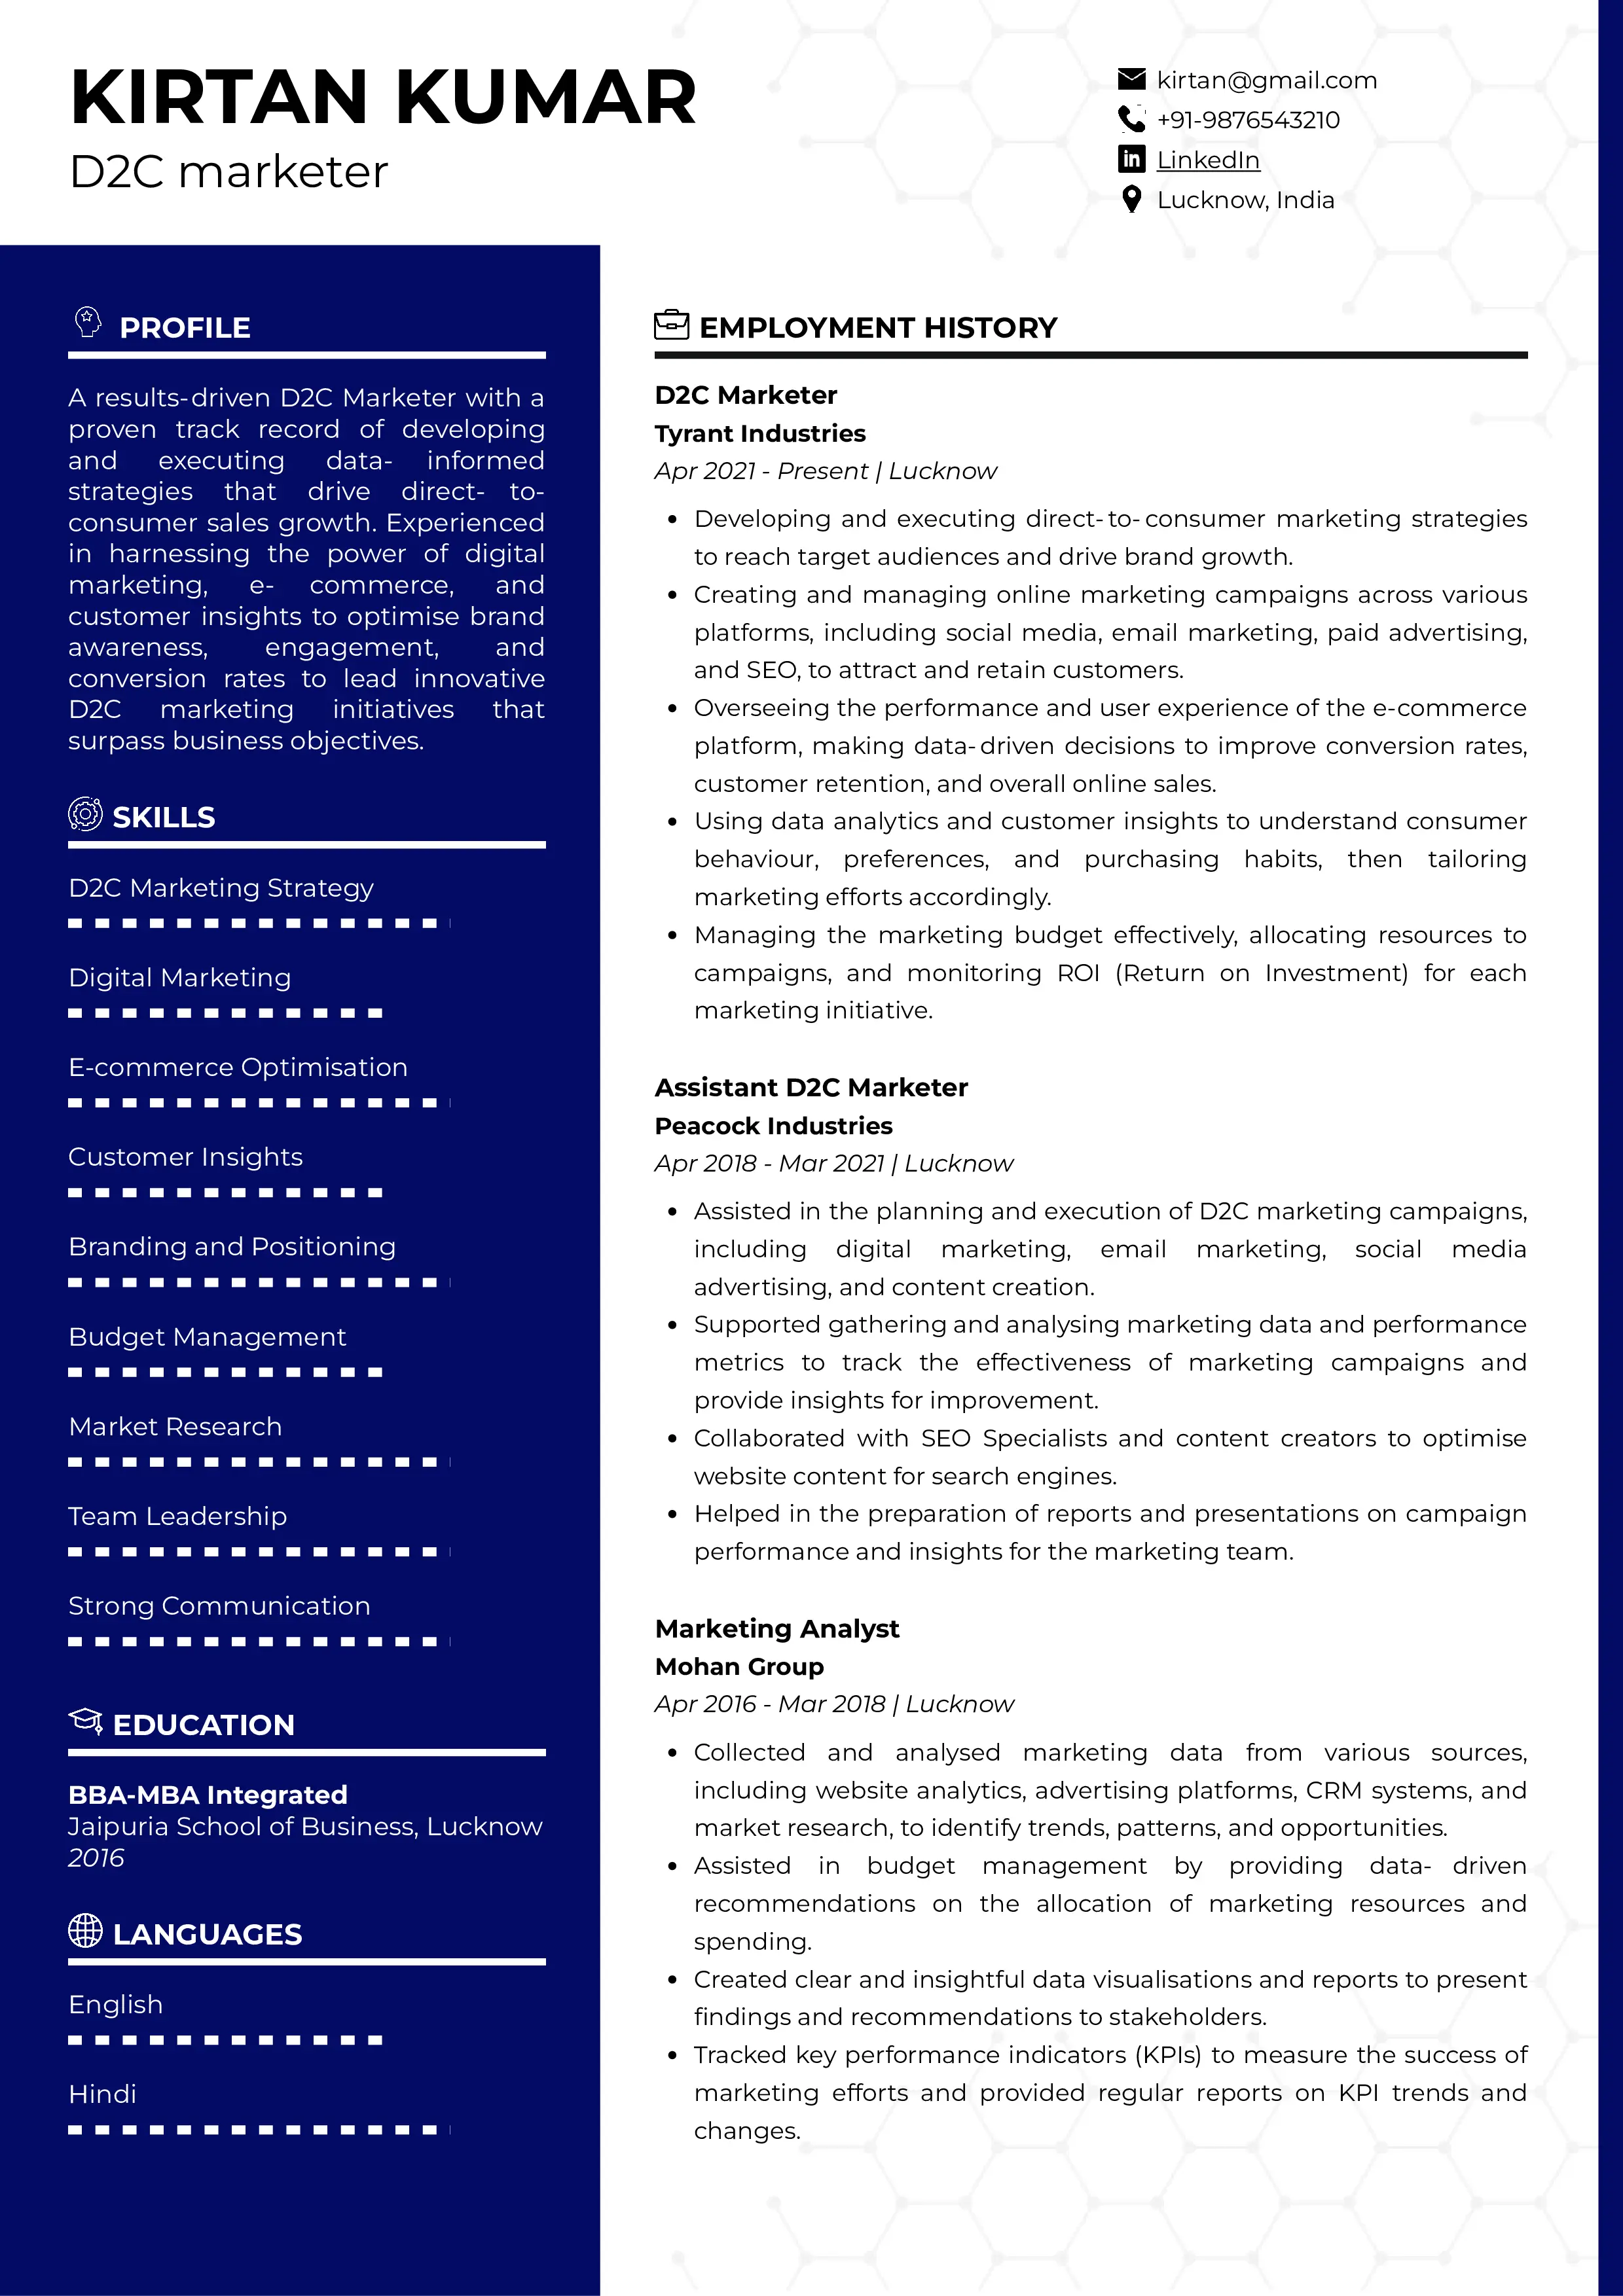 Sample Resume of D2C Marketer | Free Resume Templates & Samples on Resumod.co